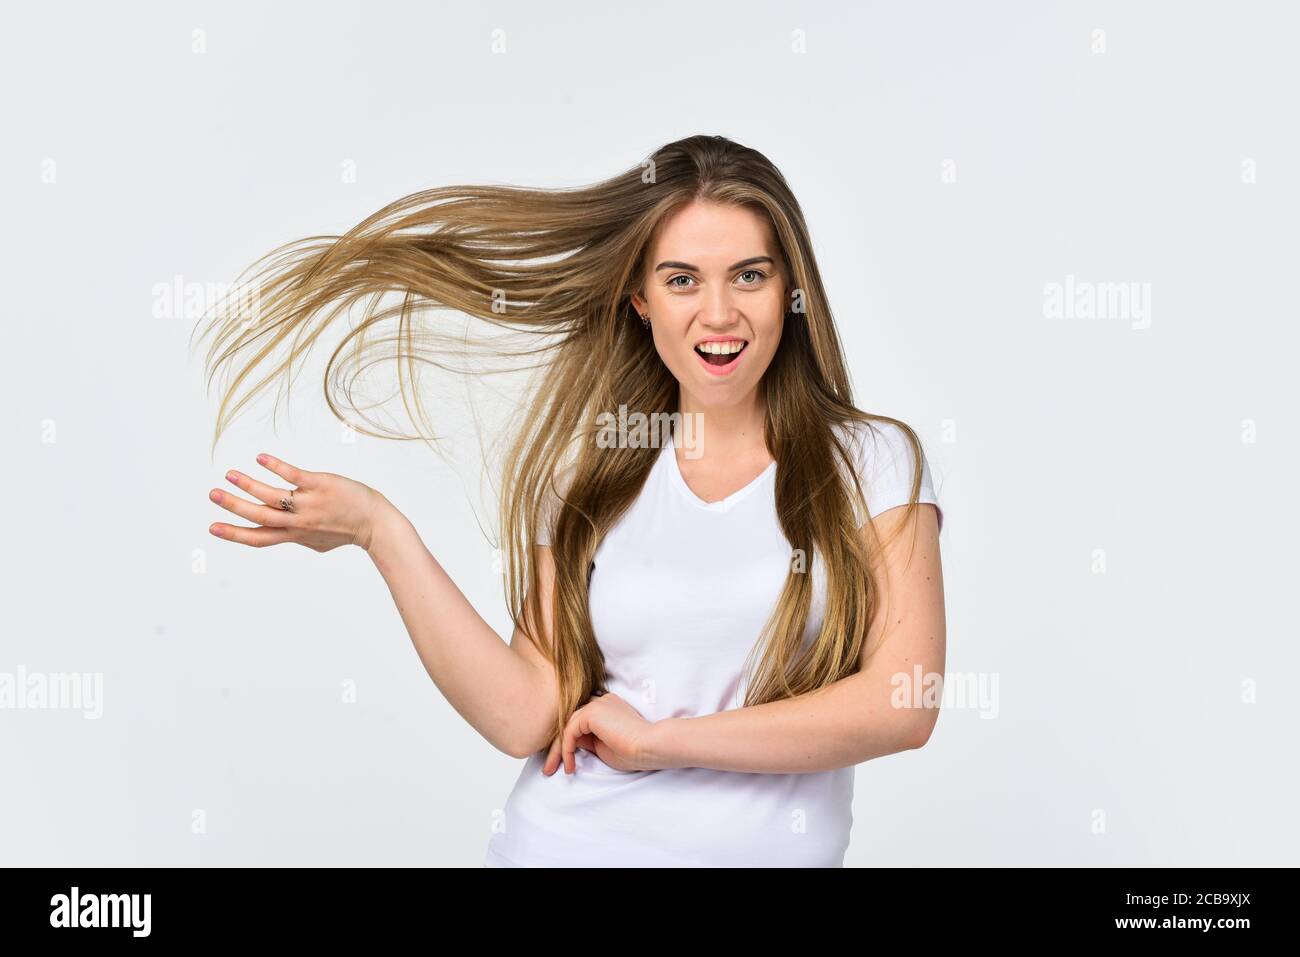 Woman long hairstyle hair fly air light and free, beauty routine concept  Stock Photo - Alamy